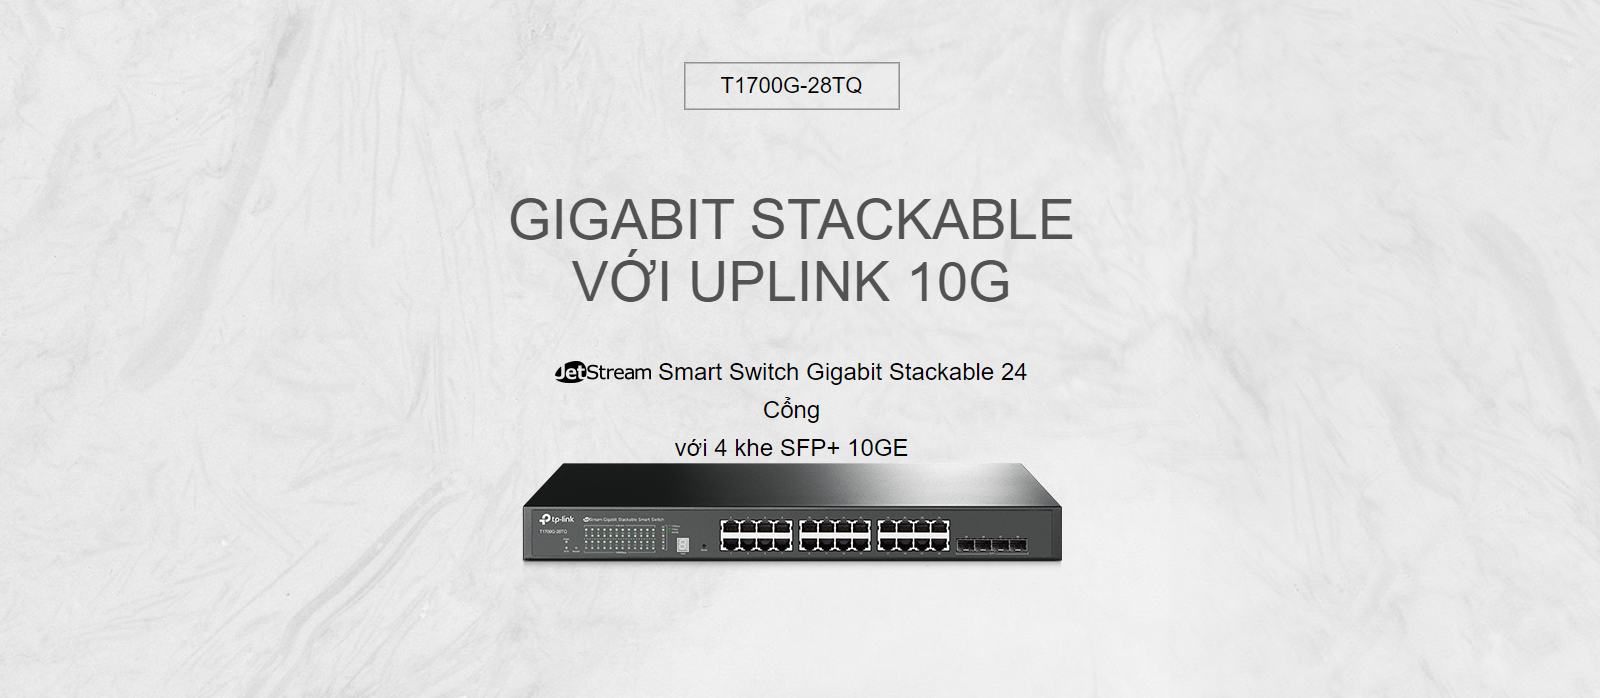 Switch TP-Link T1700G-28TQ JetStream 24-Port Gigabit Stackable Smart Switch with 4 10GE SFP+ Slots